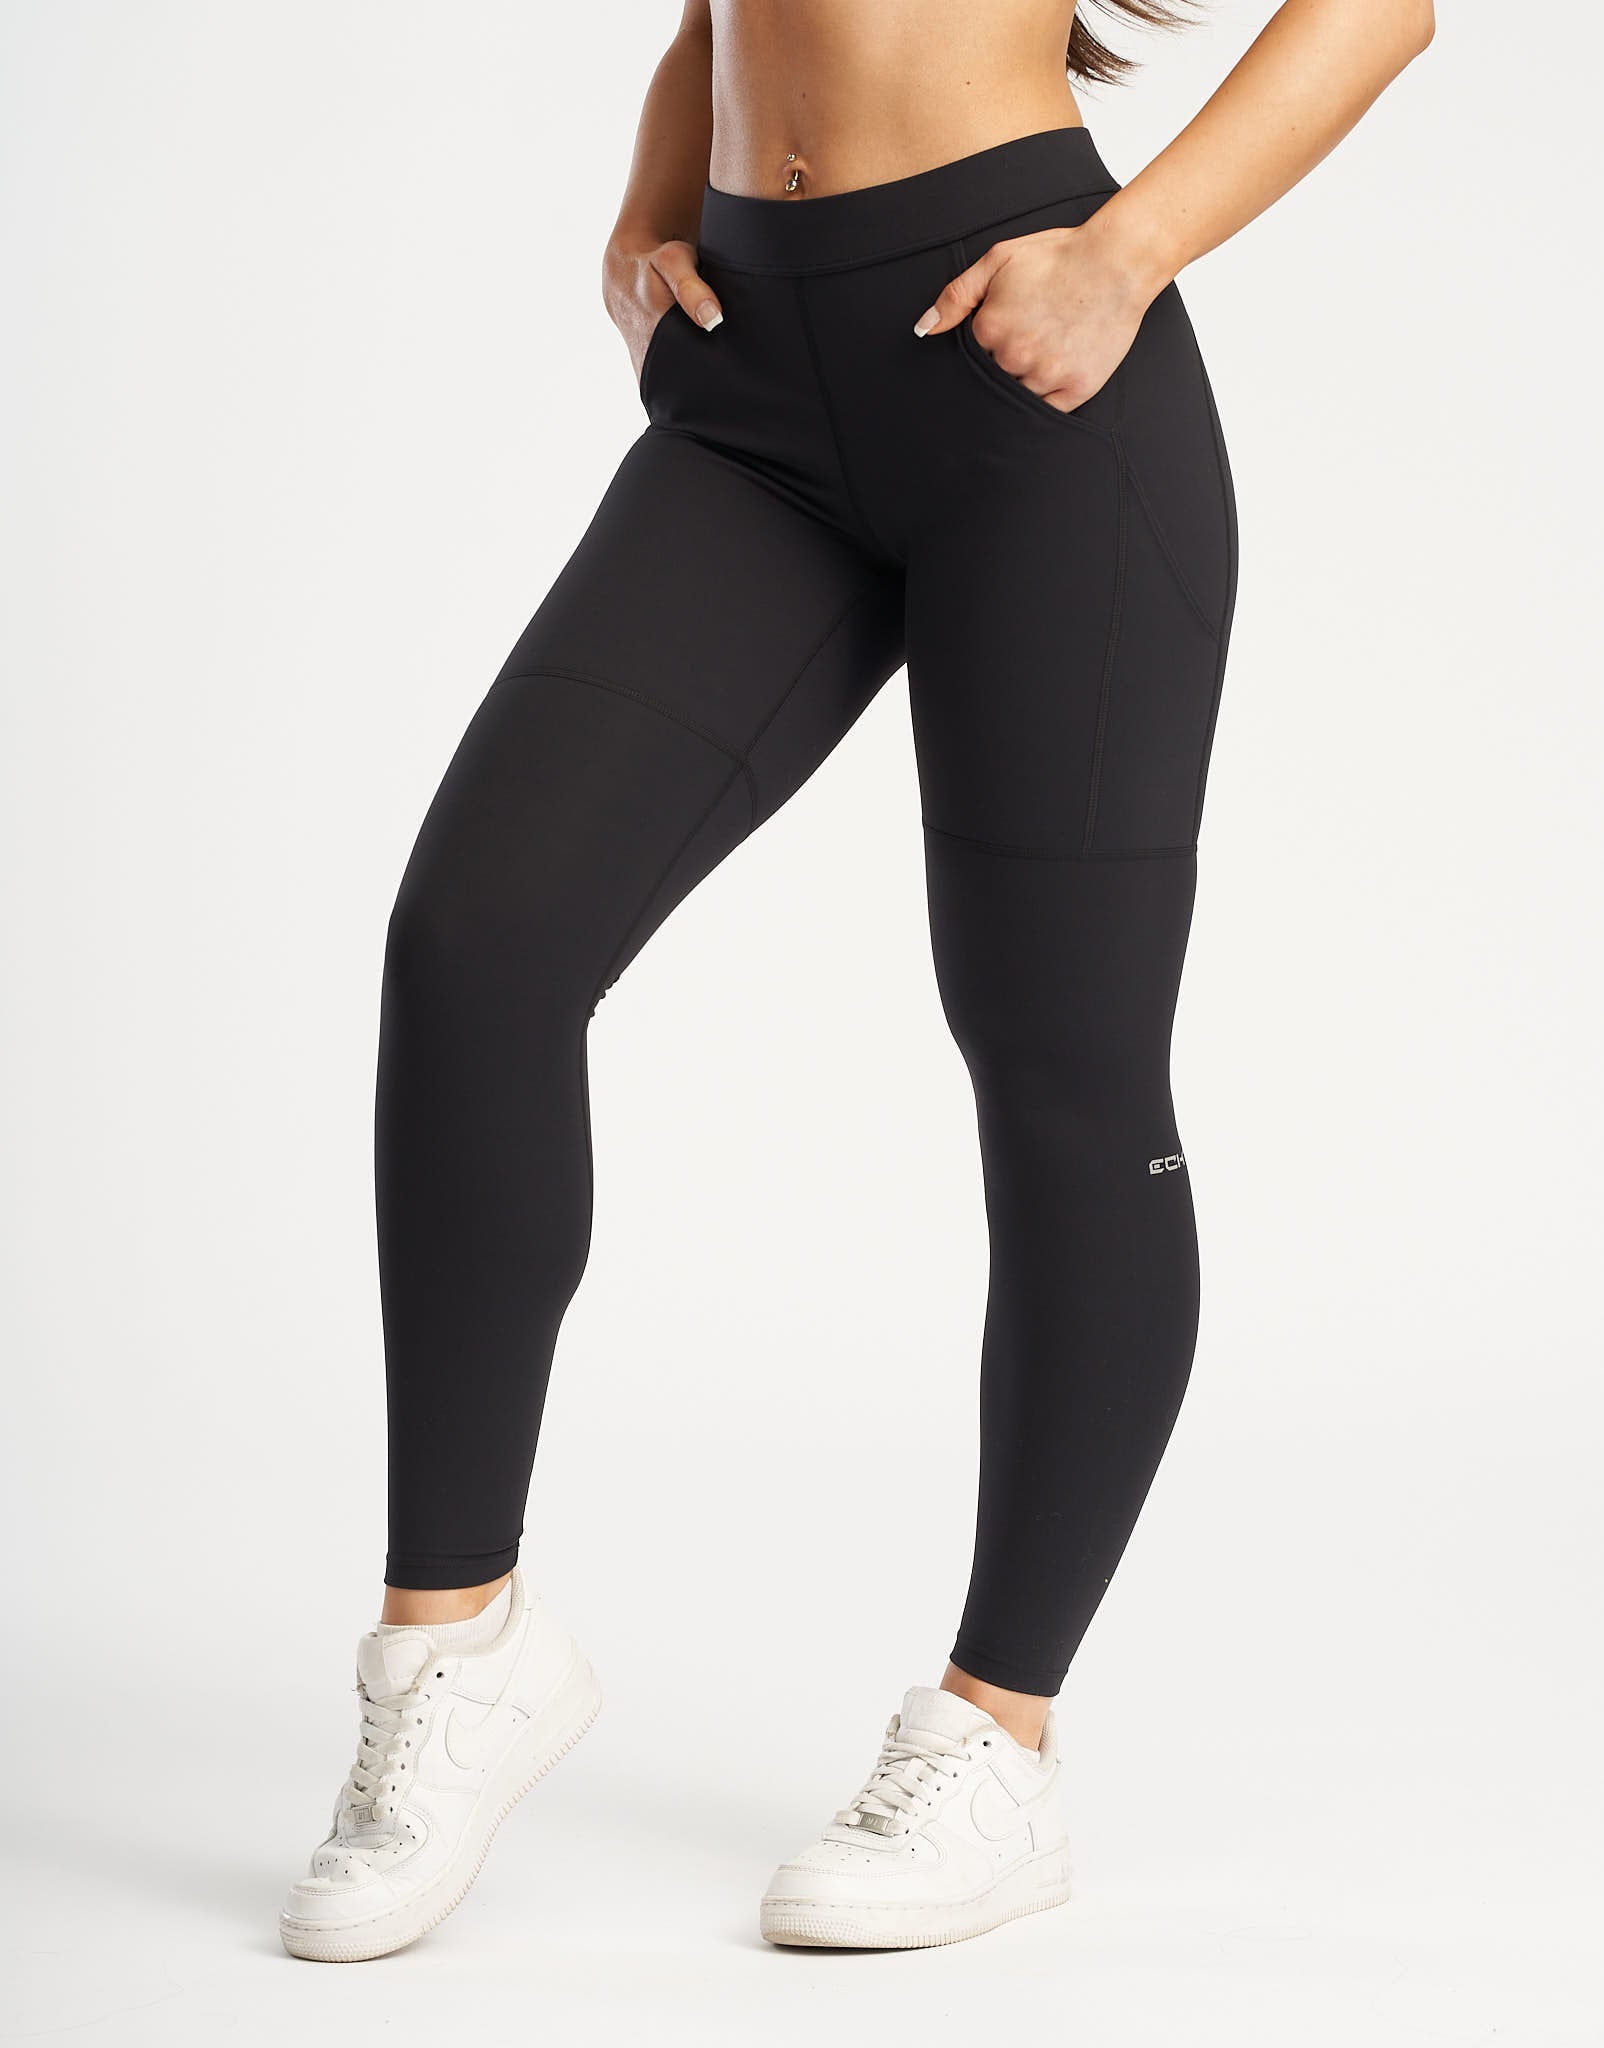 Stretchable Leggings with Pockets for Yoga, Pilates, and Fashionable  Comfort || TWELVE HORNS